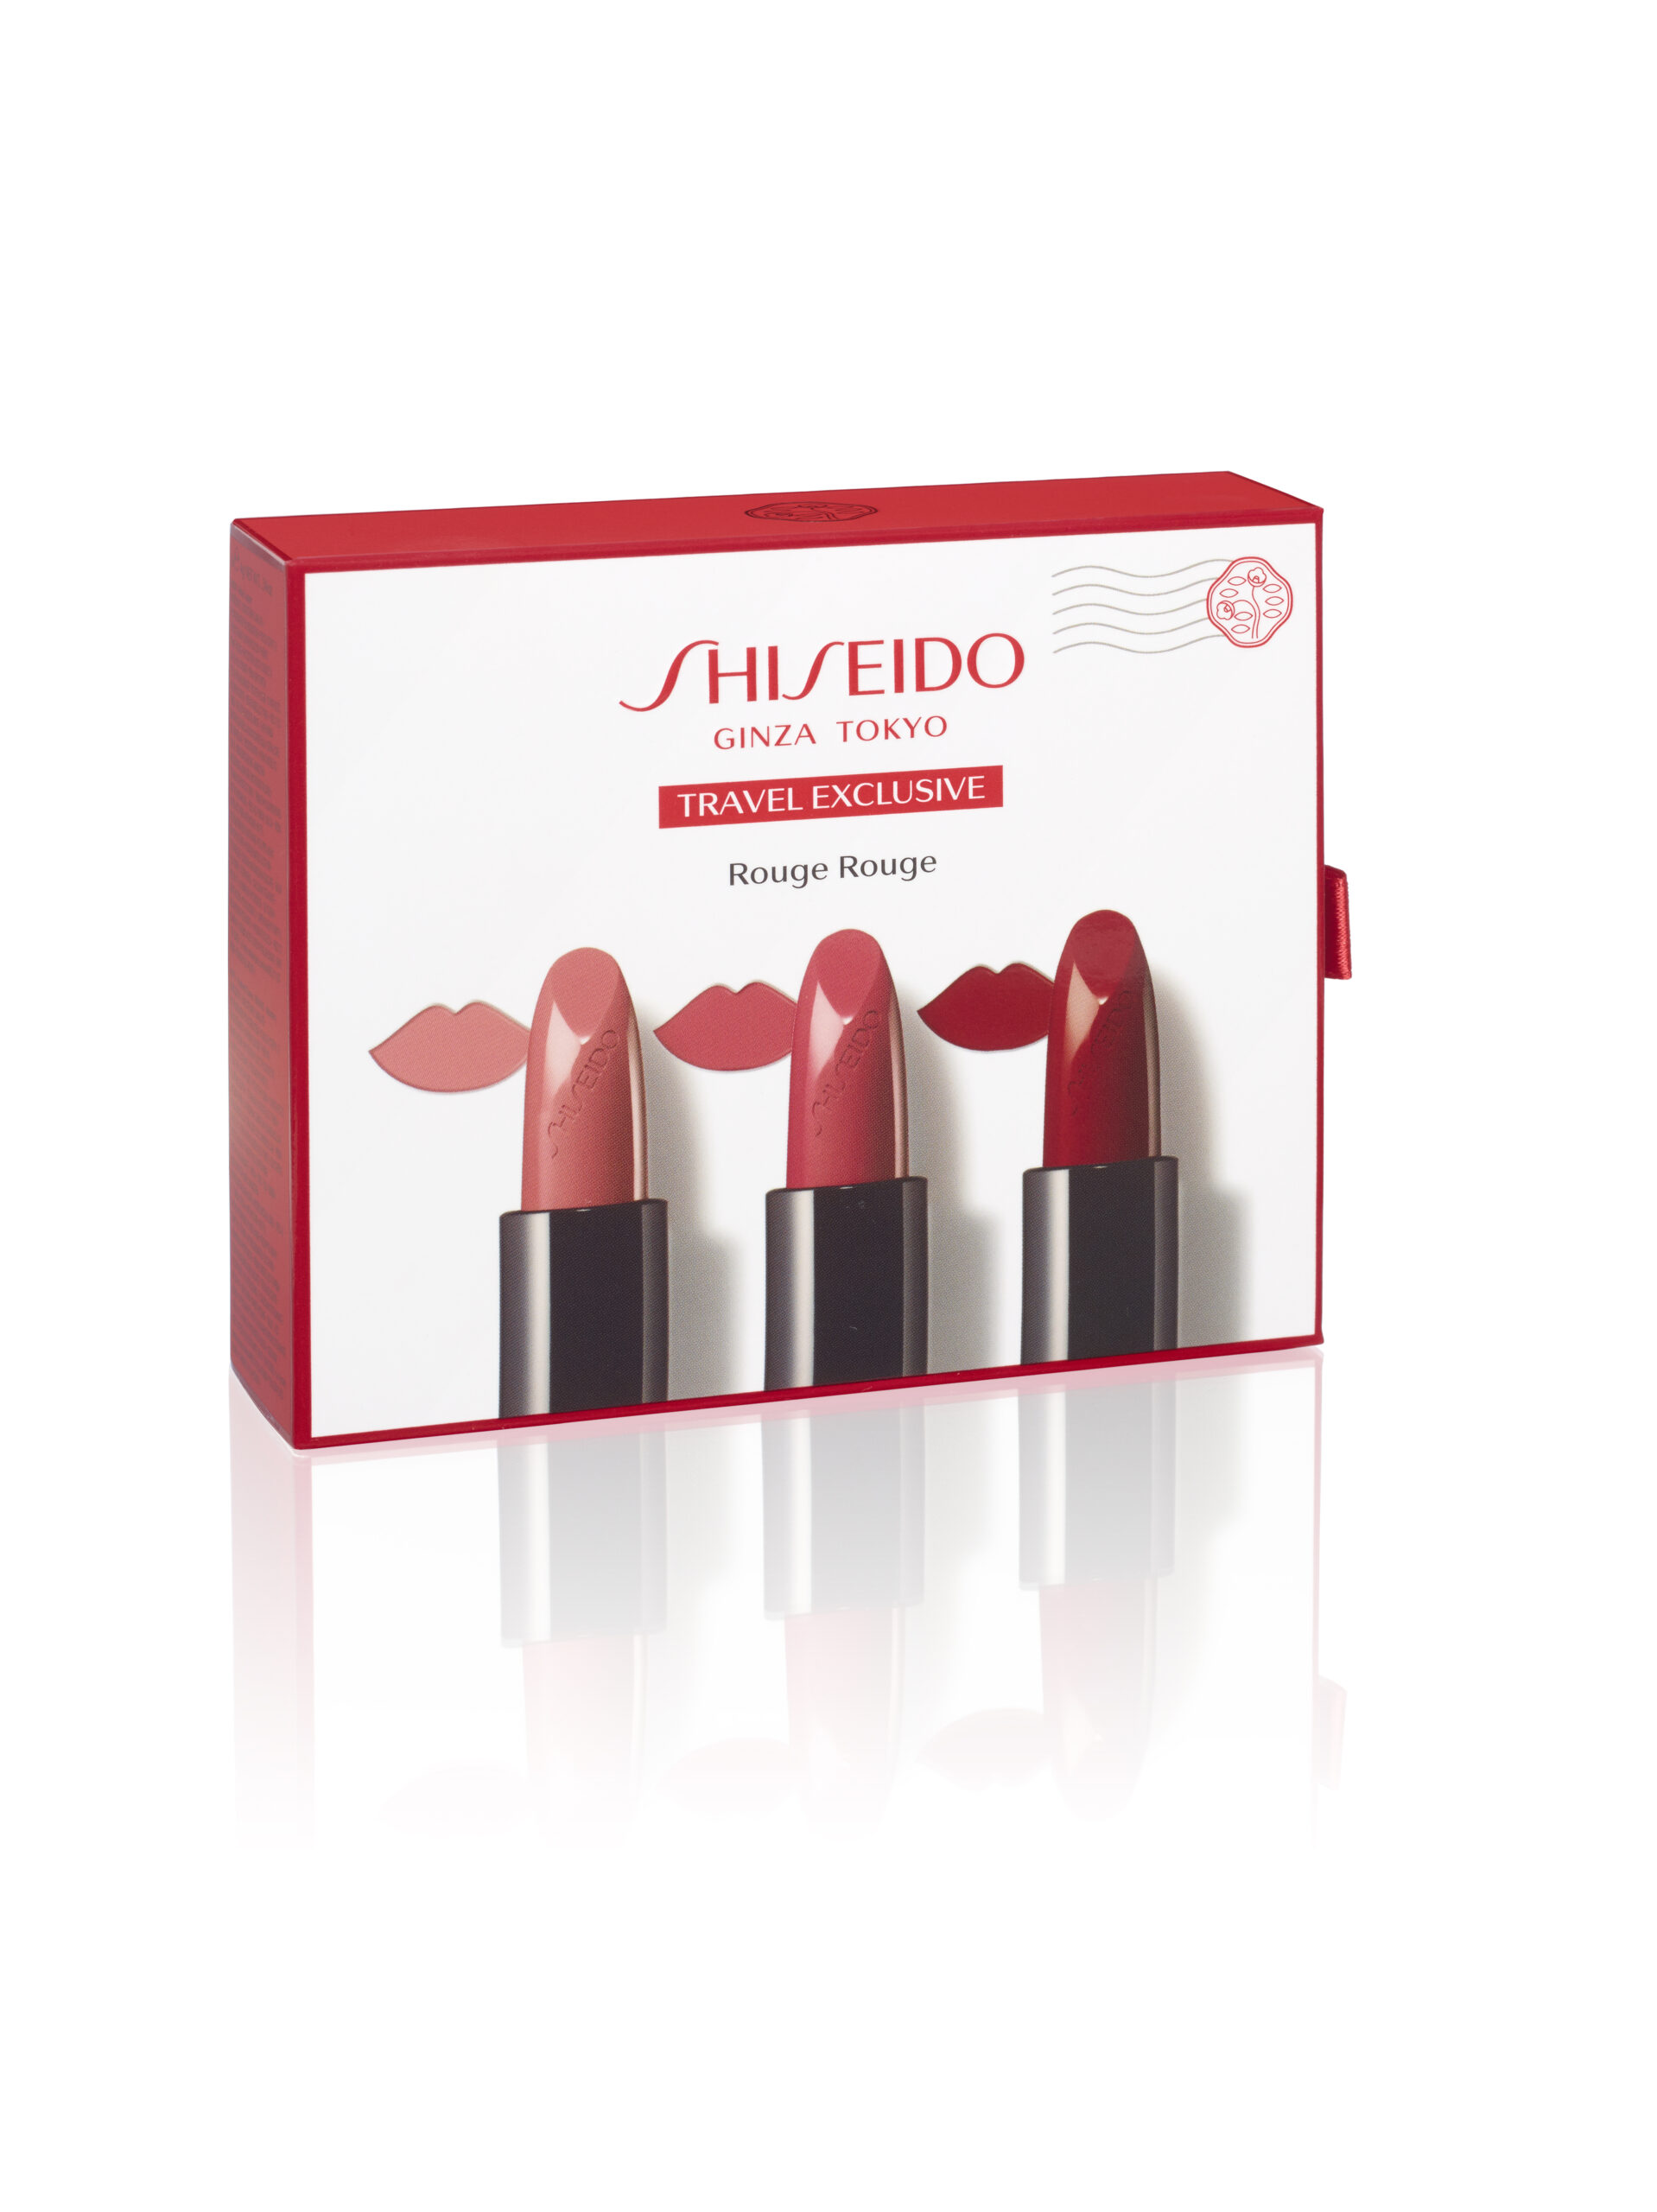 The Shiseido Rouge Rouge travel exclusive offers three shades to suit different moods